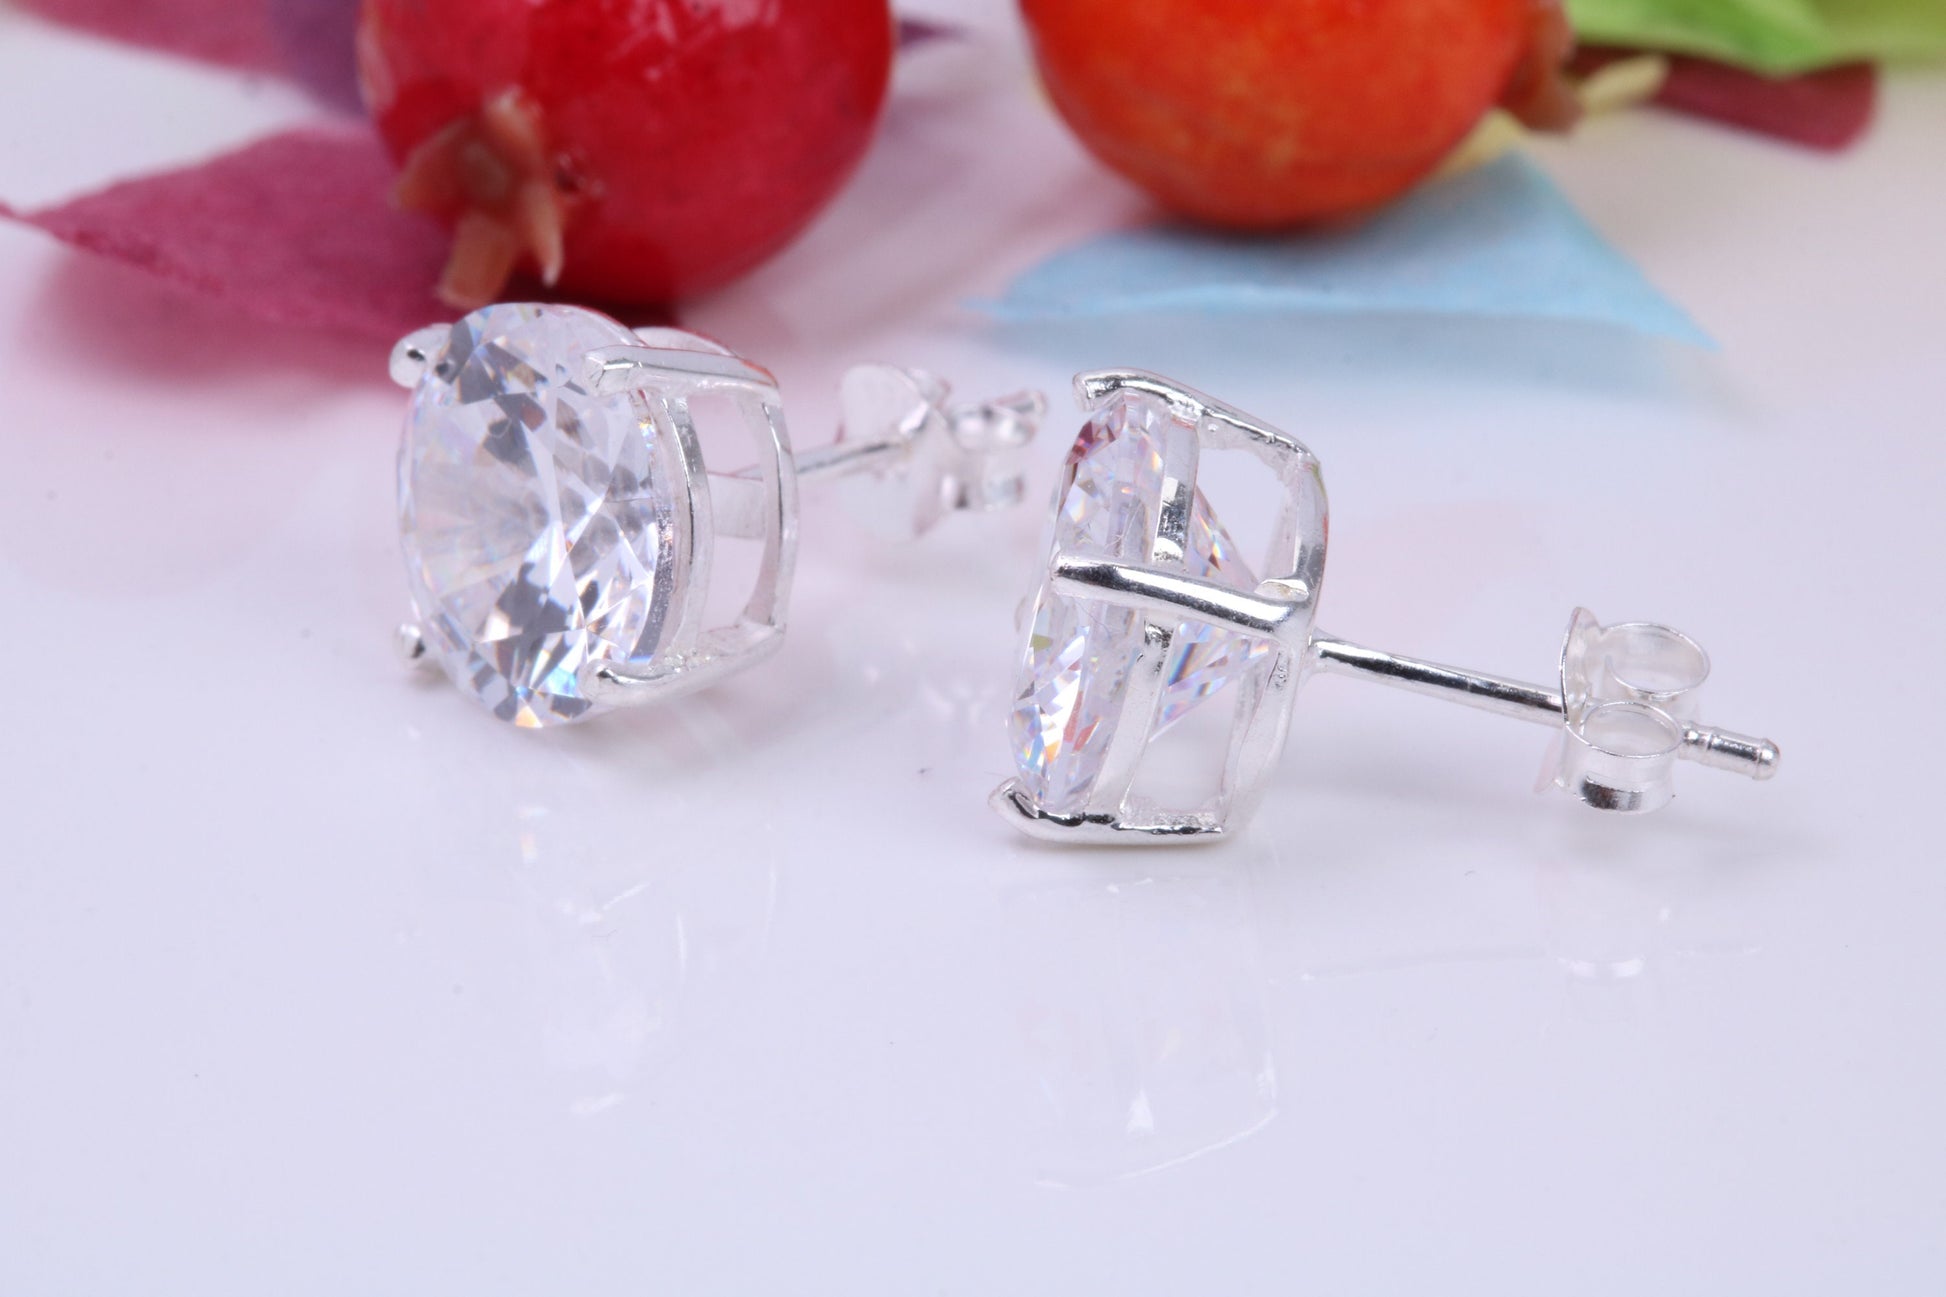 10 mm Round Cubic Zirconia set Stud Earrings, Made from Solid Cast Sterling Silver, Ideal for Gents